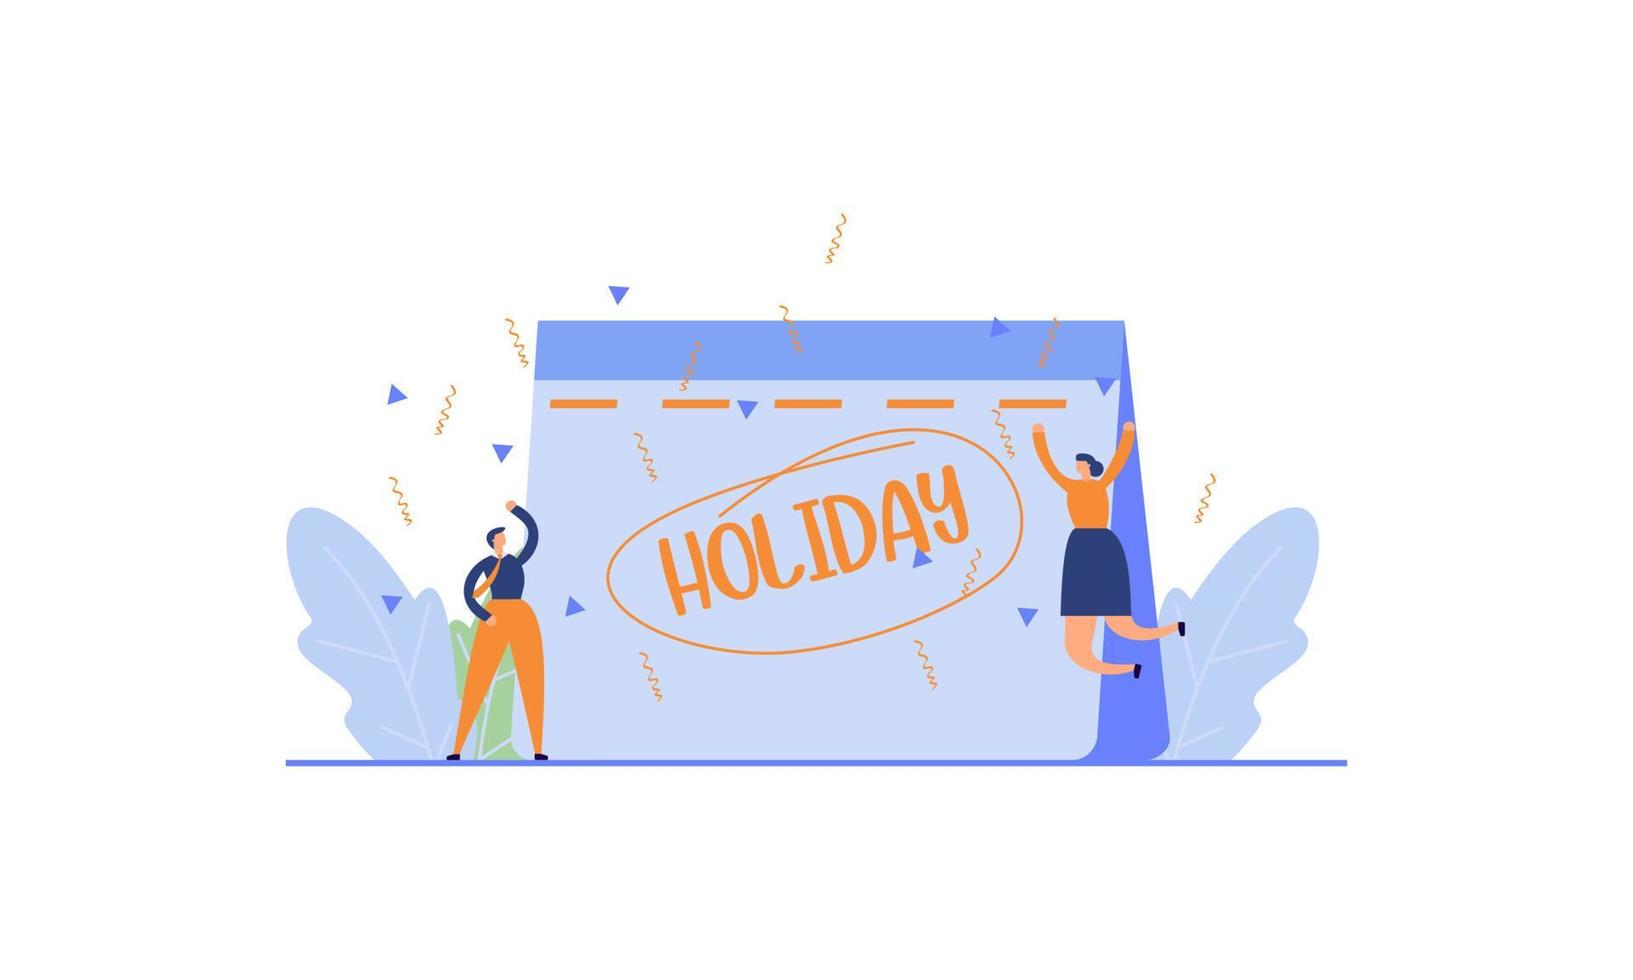 People jumping with joy to celebrate long holidays or vacation illustration vector